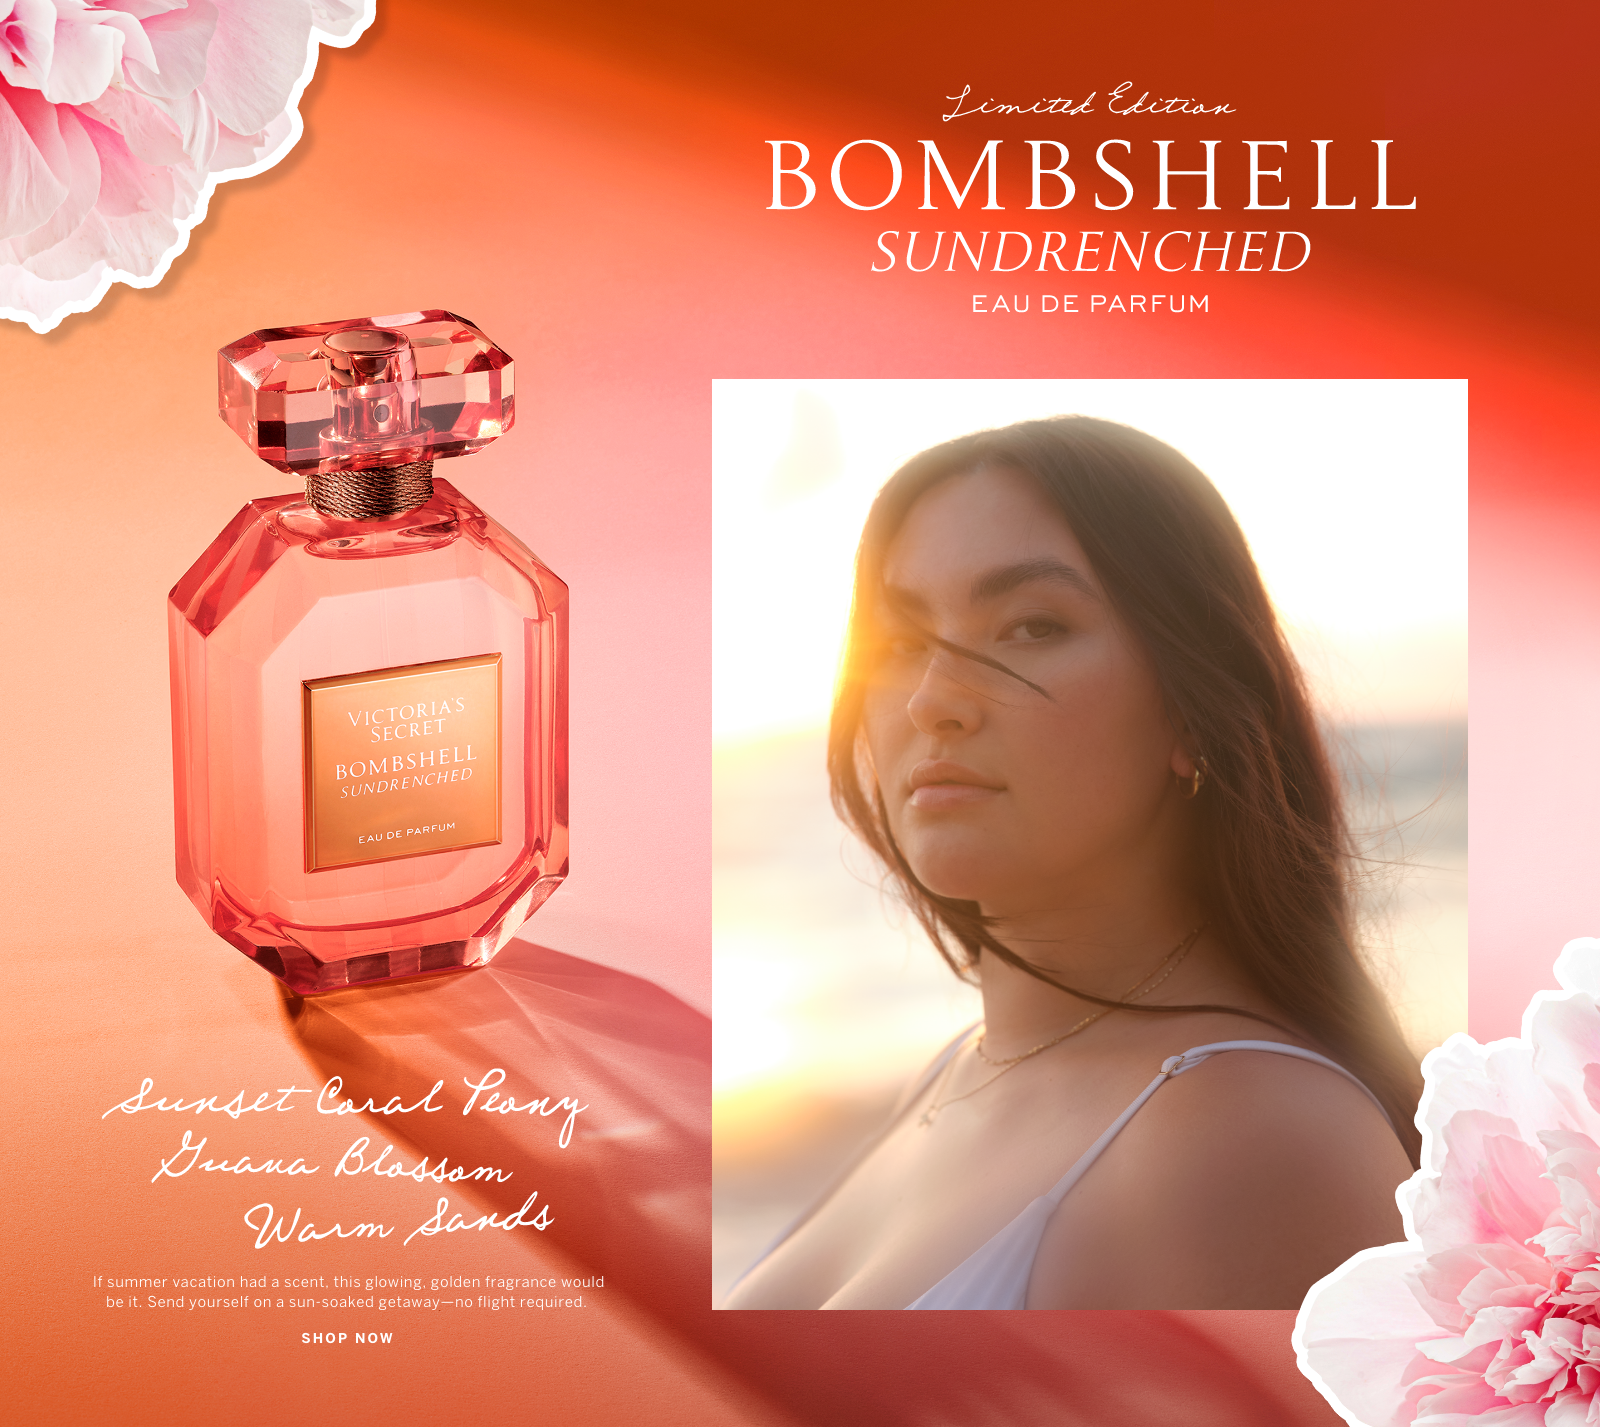 Bombshell-sundrenched